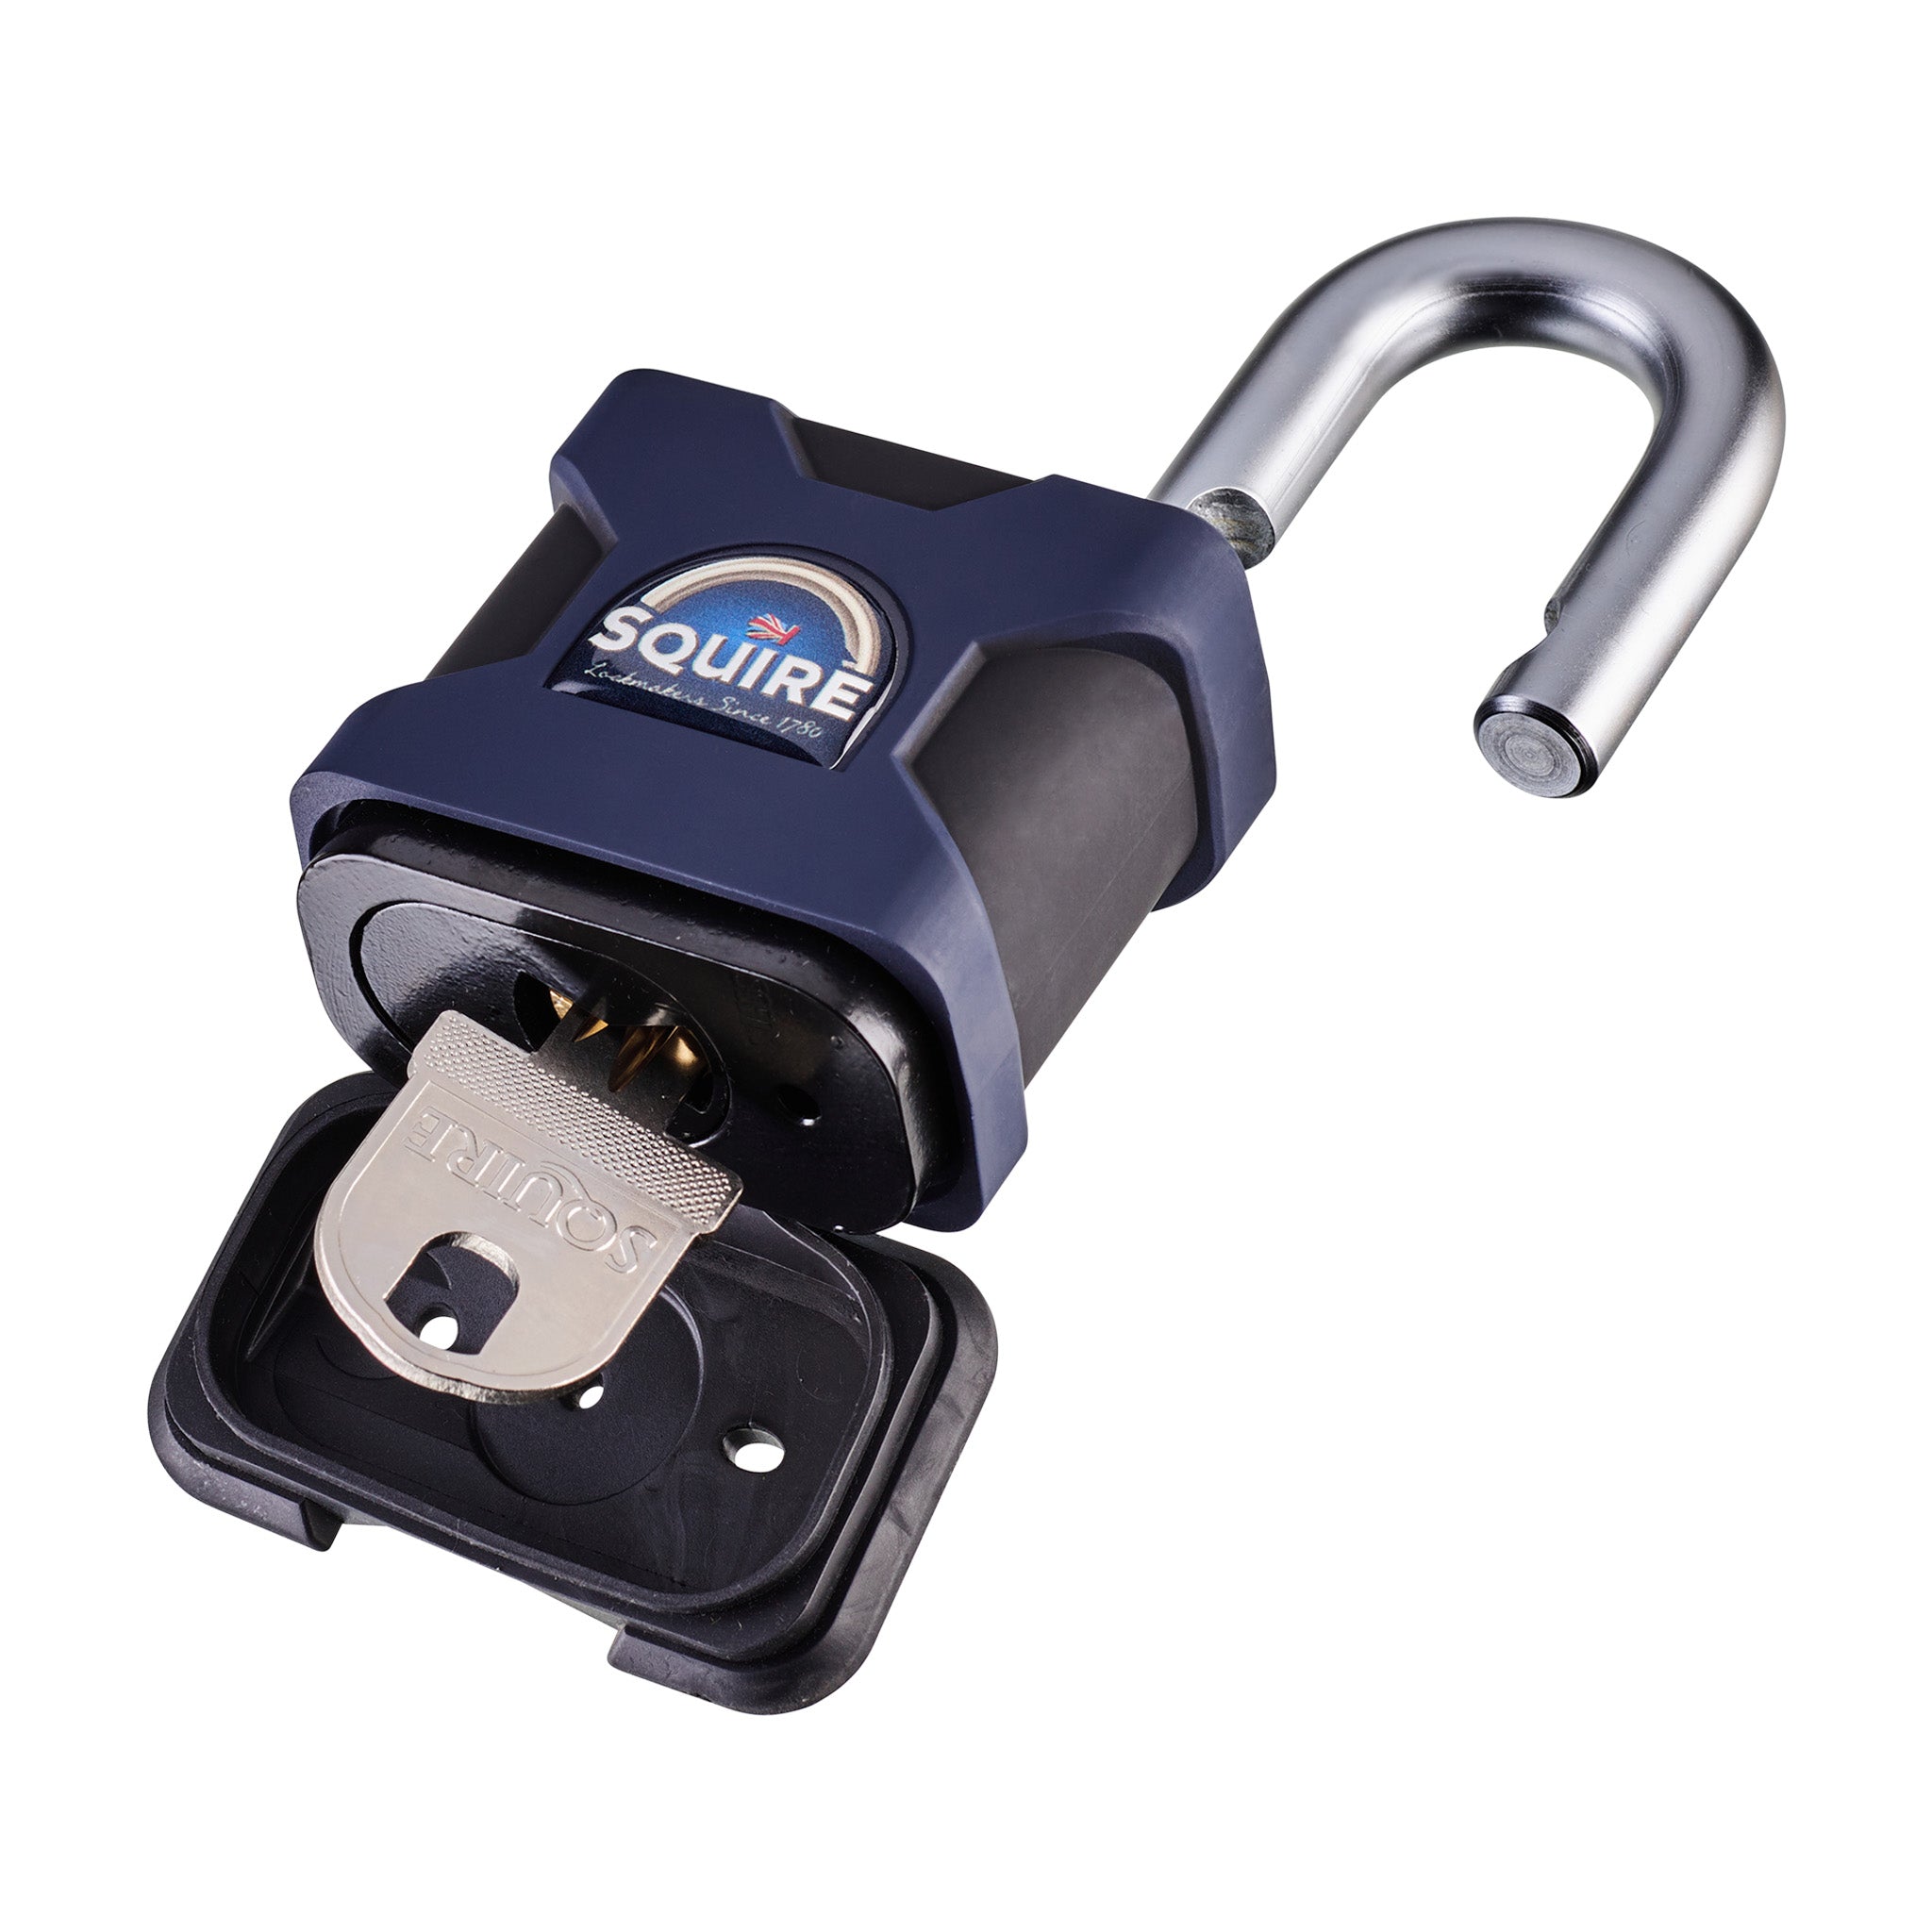 Squire Stronghold 50mm Hardened Steel Padlock - Open Shackle